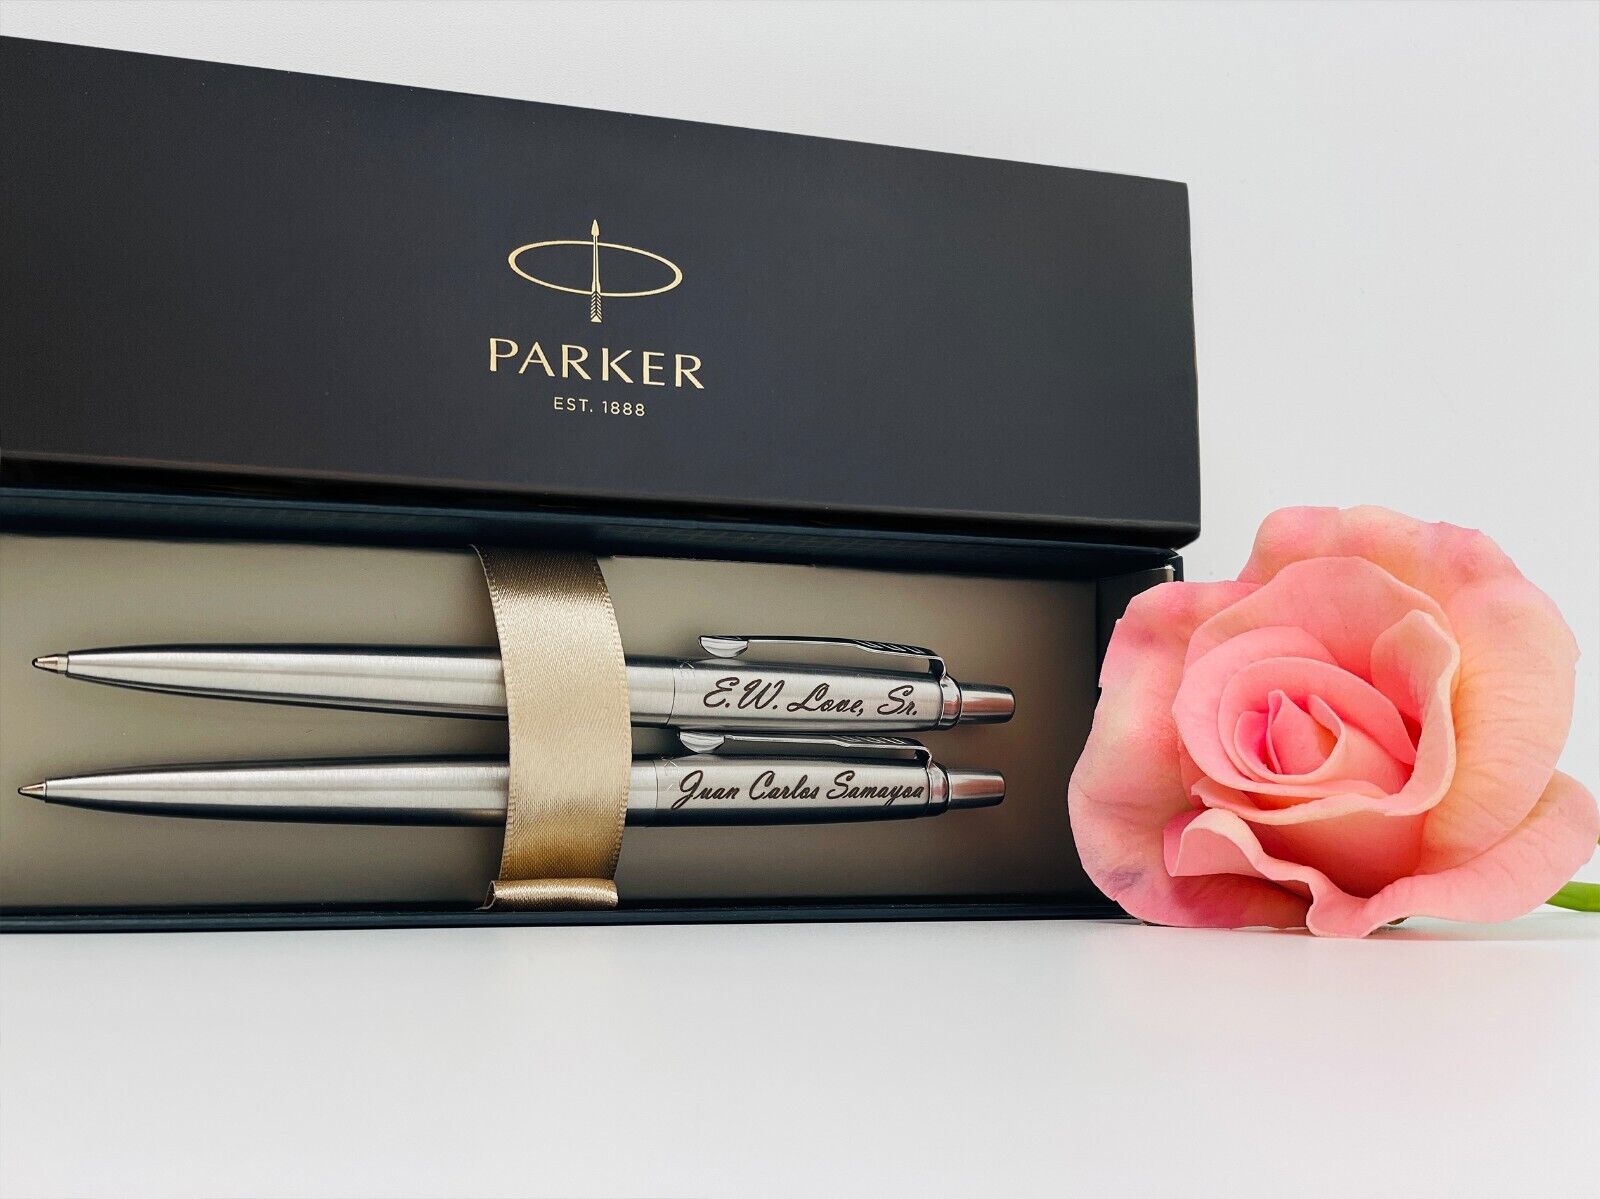 Chrome Parker Pen Personalized Engraved, Stainless Steel Pen, Parker Gift Box